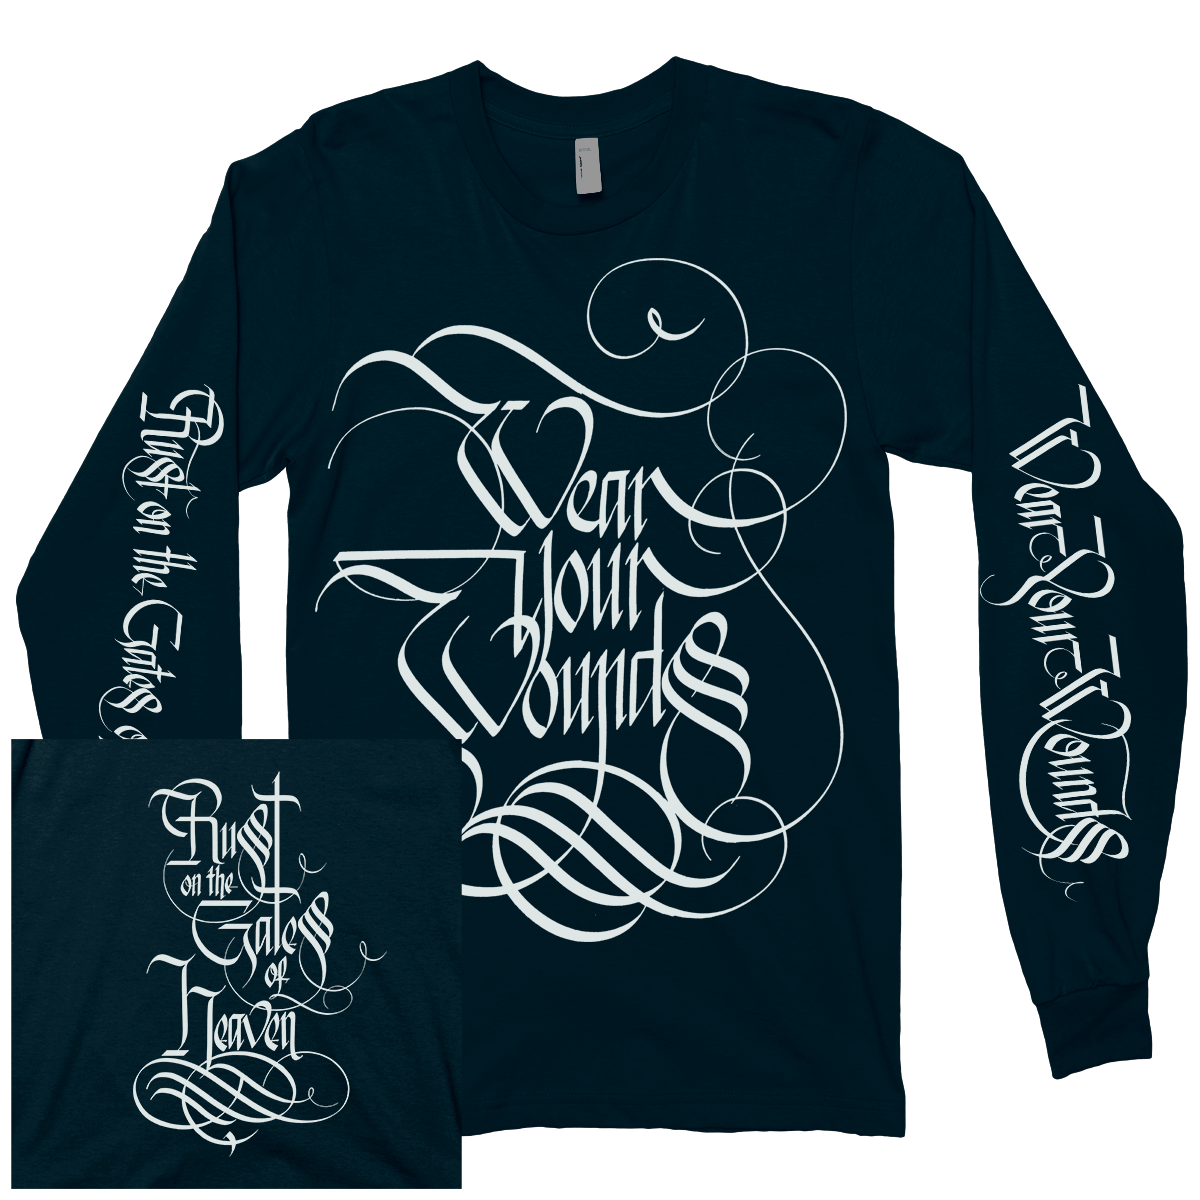 Wear Your Wounds "Rust on the Gates of Heaven: Logo" Longsleeve